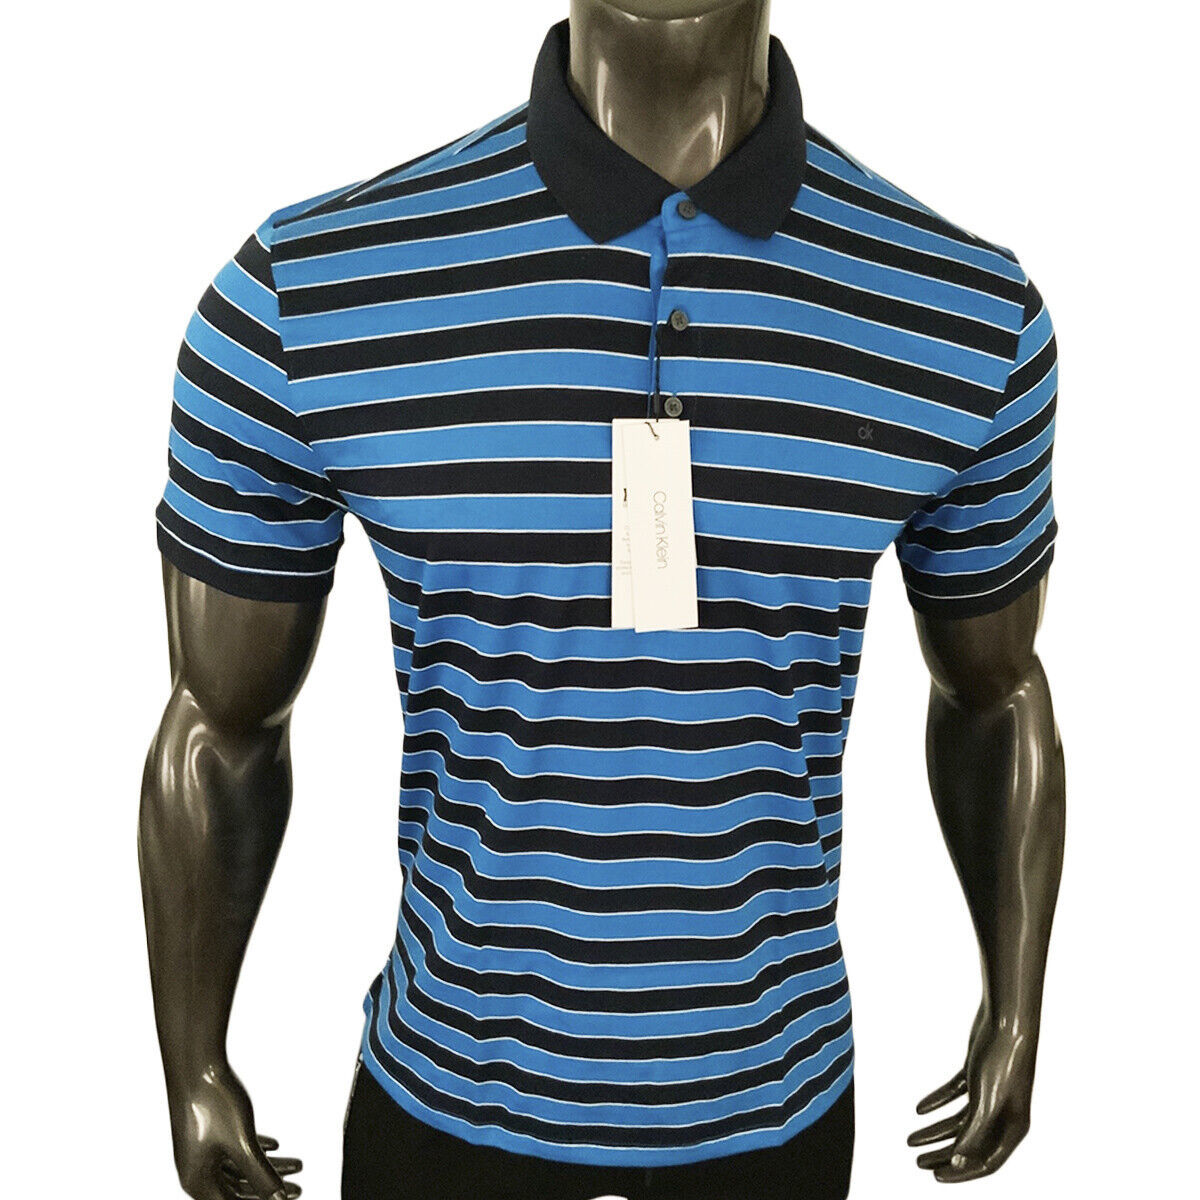 Primary image for NWT CALVIN KLEIN MSRP $54.99 STRIPED MENS SHORT SLEEVE NAVY POLO RUGBY SHIRT 2XL